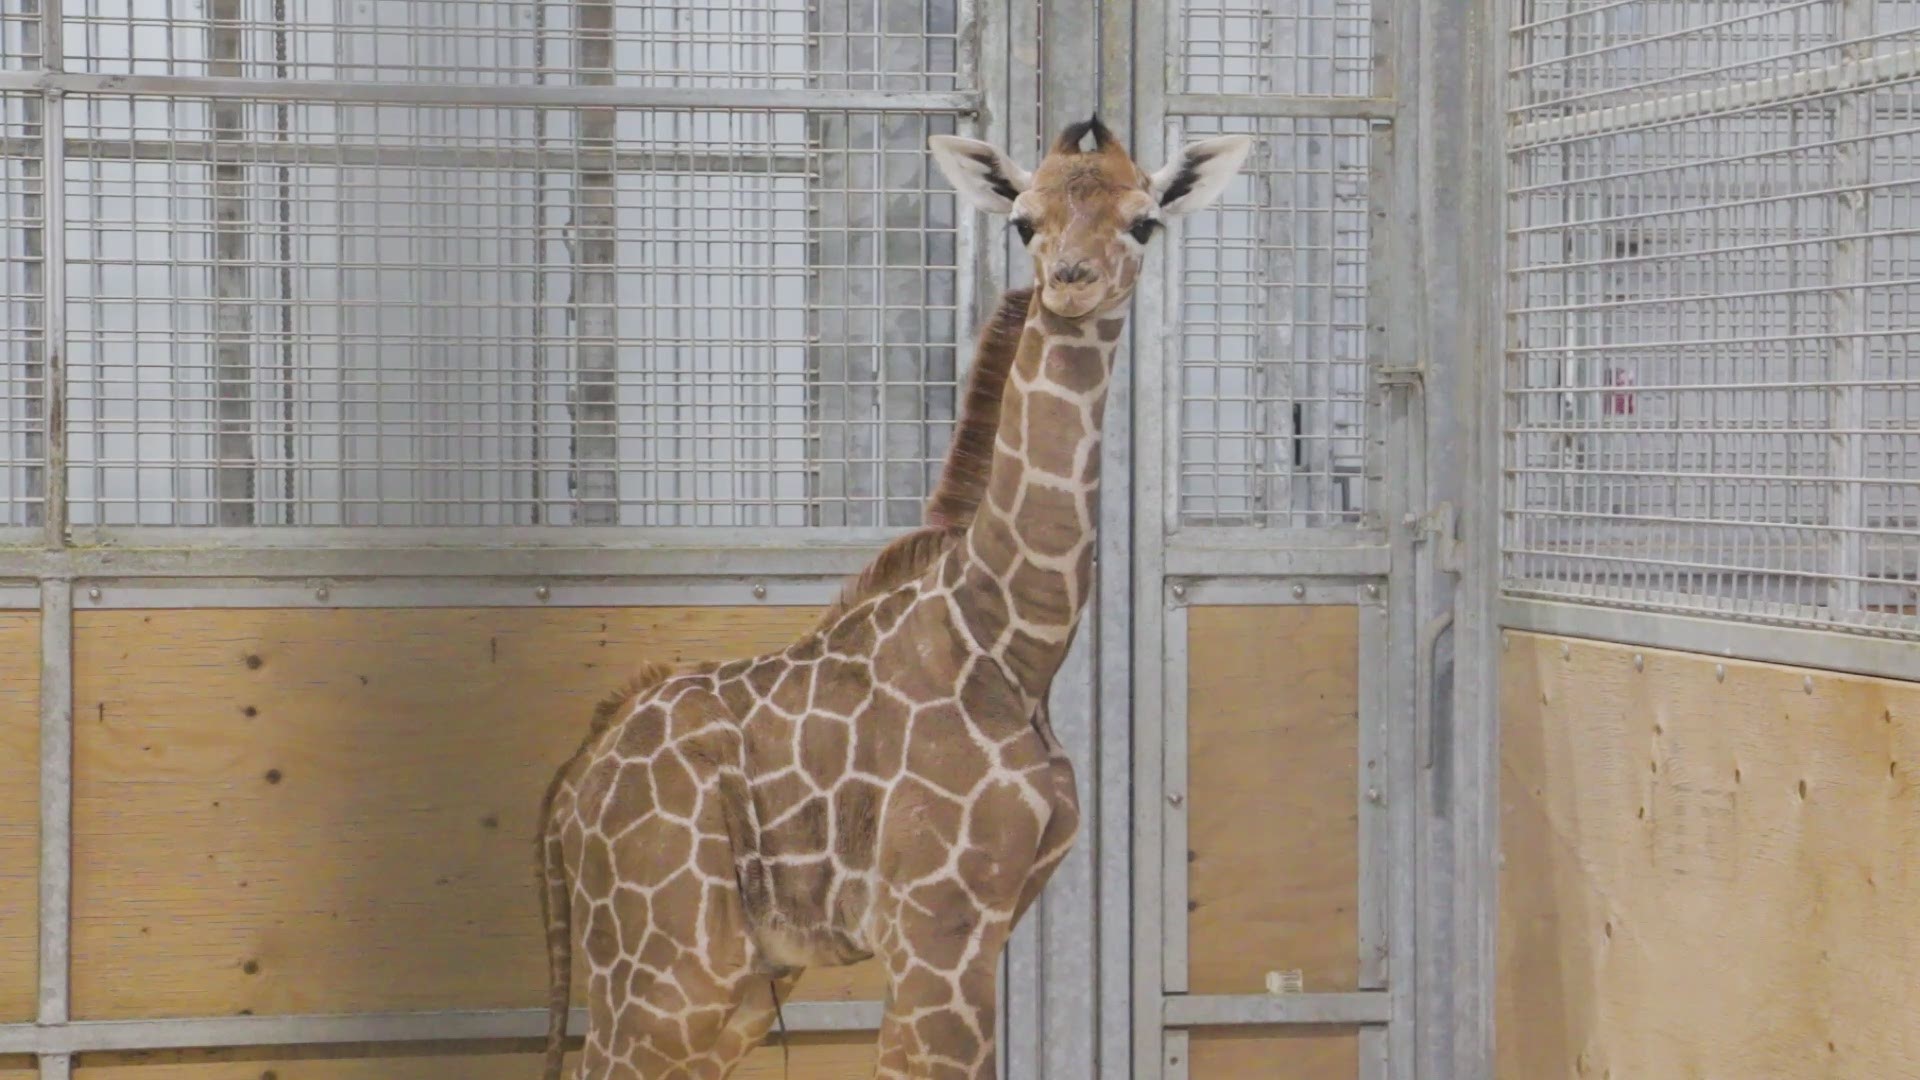 Just 16 giraffe calves were born in North America zoos in 2020, and only 33 worldwide.